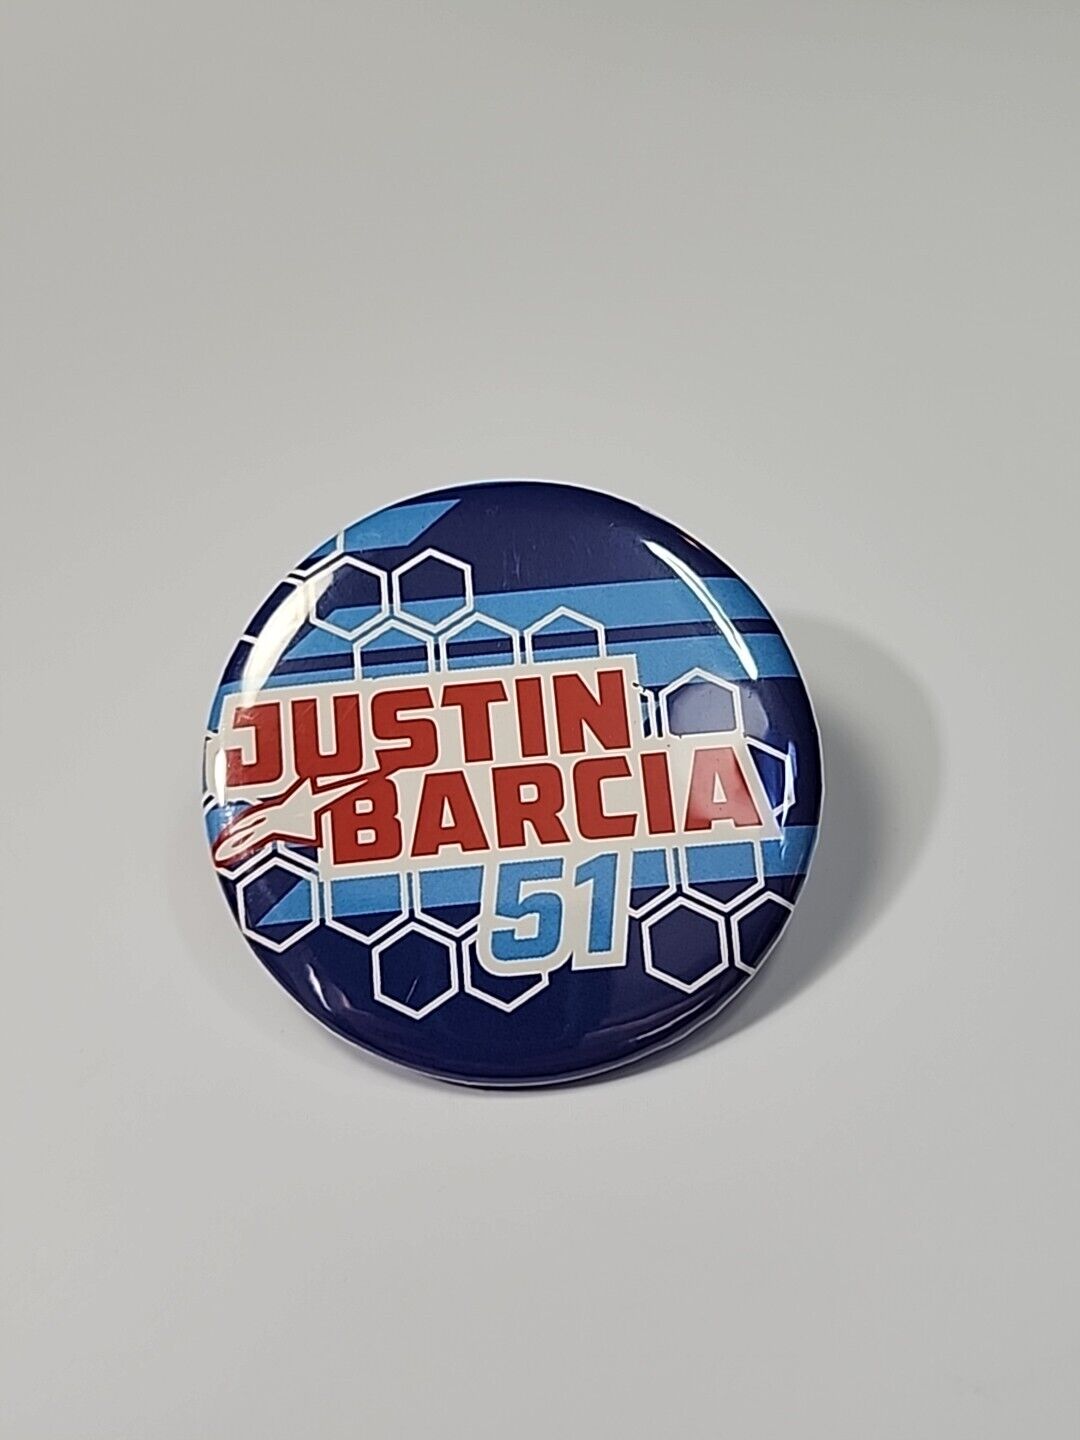 Justin Barcia #51 Button Pin Motorcycle Racer